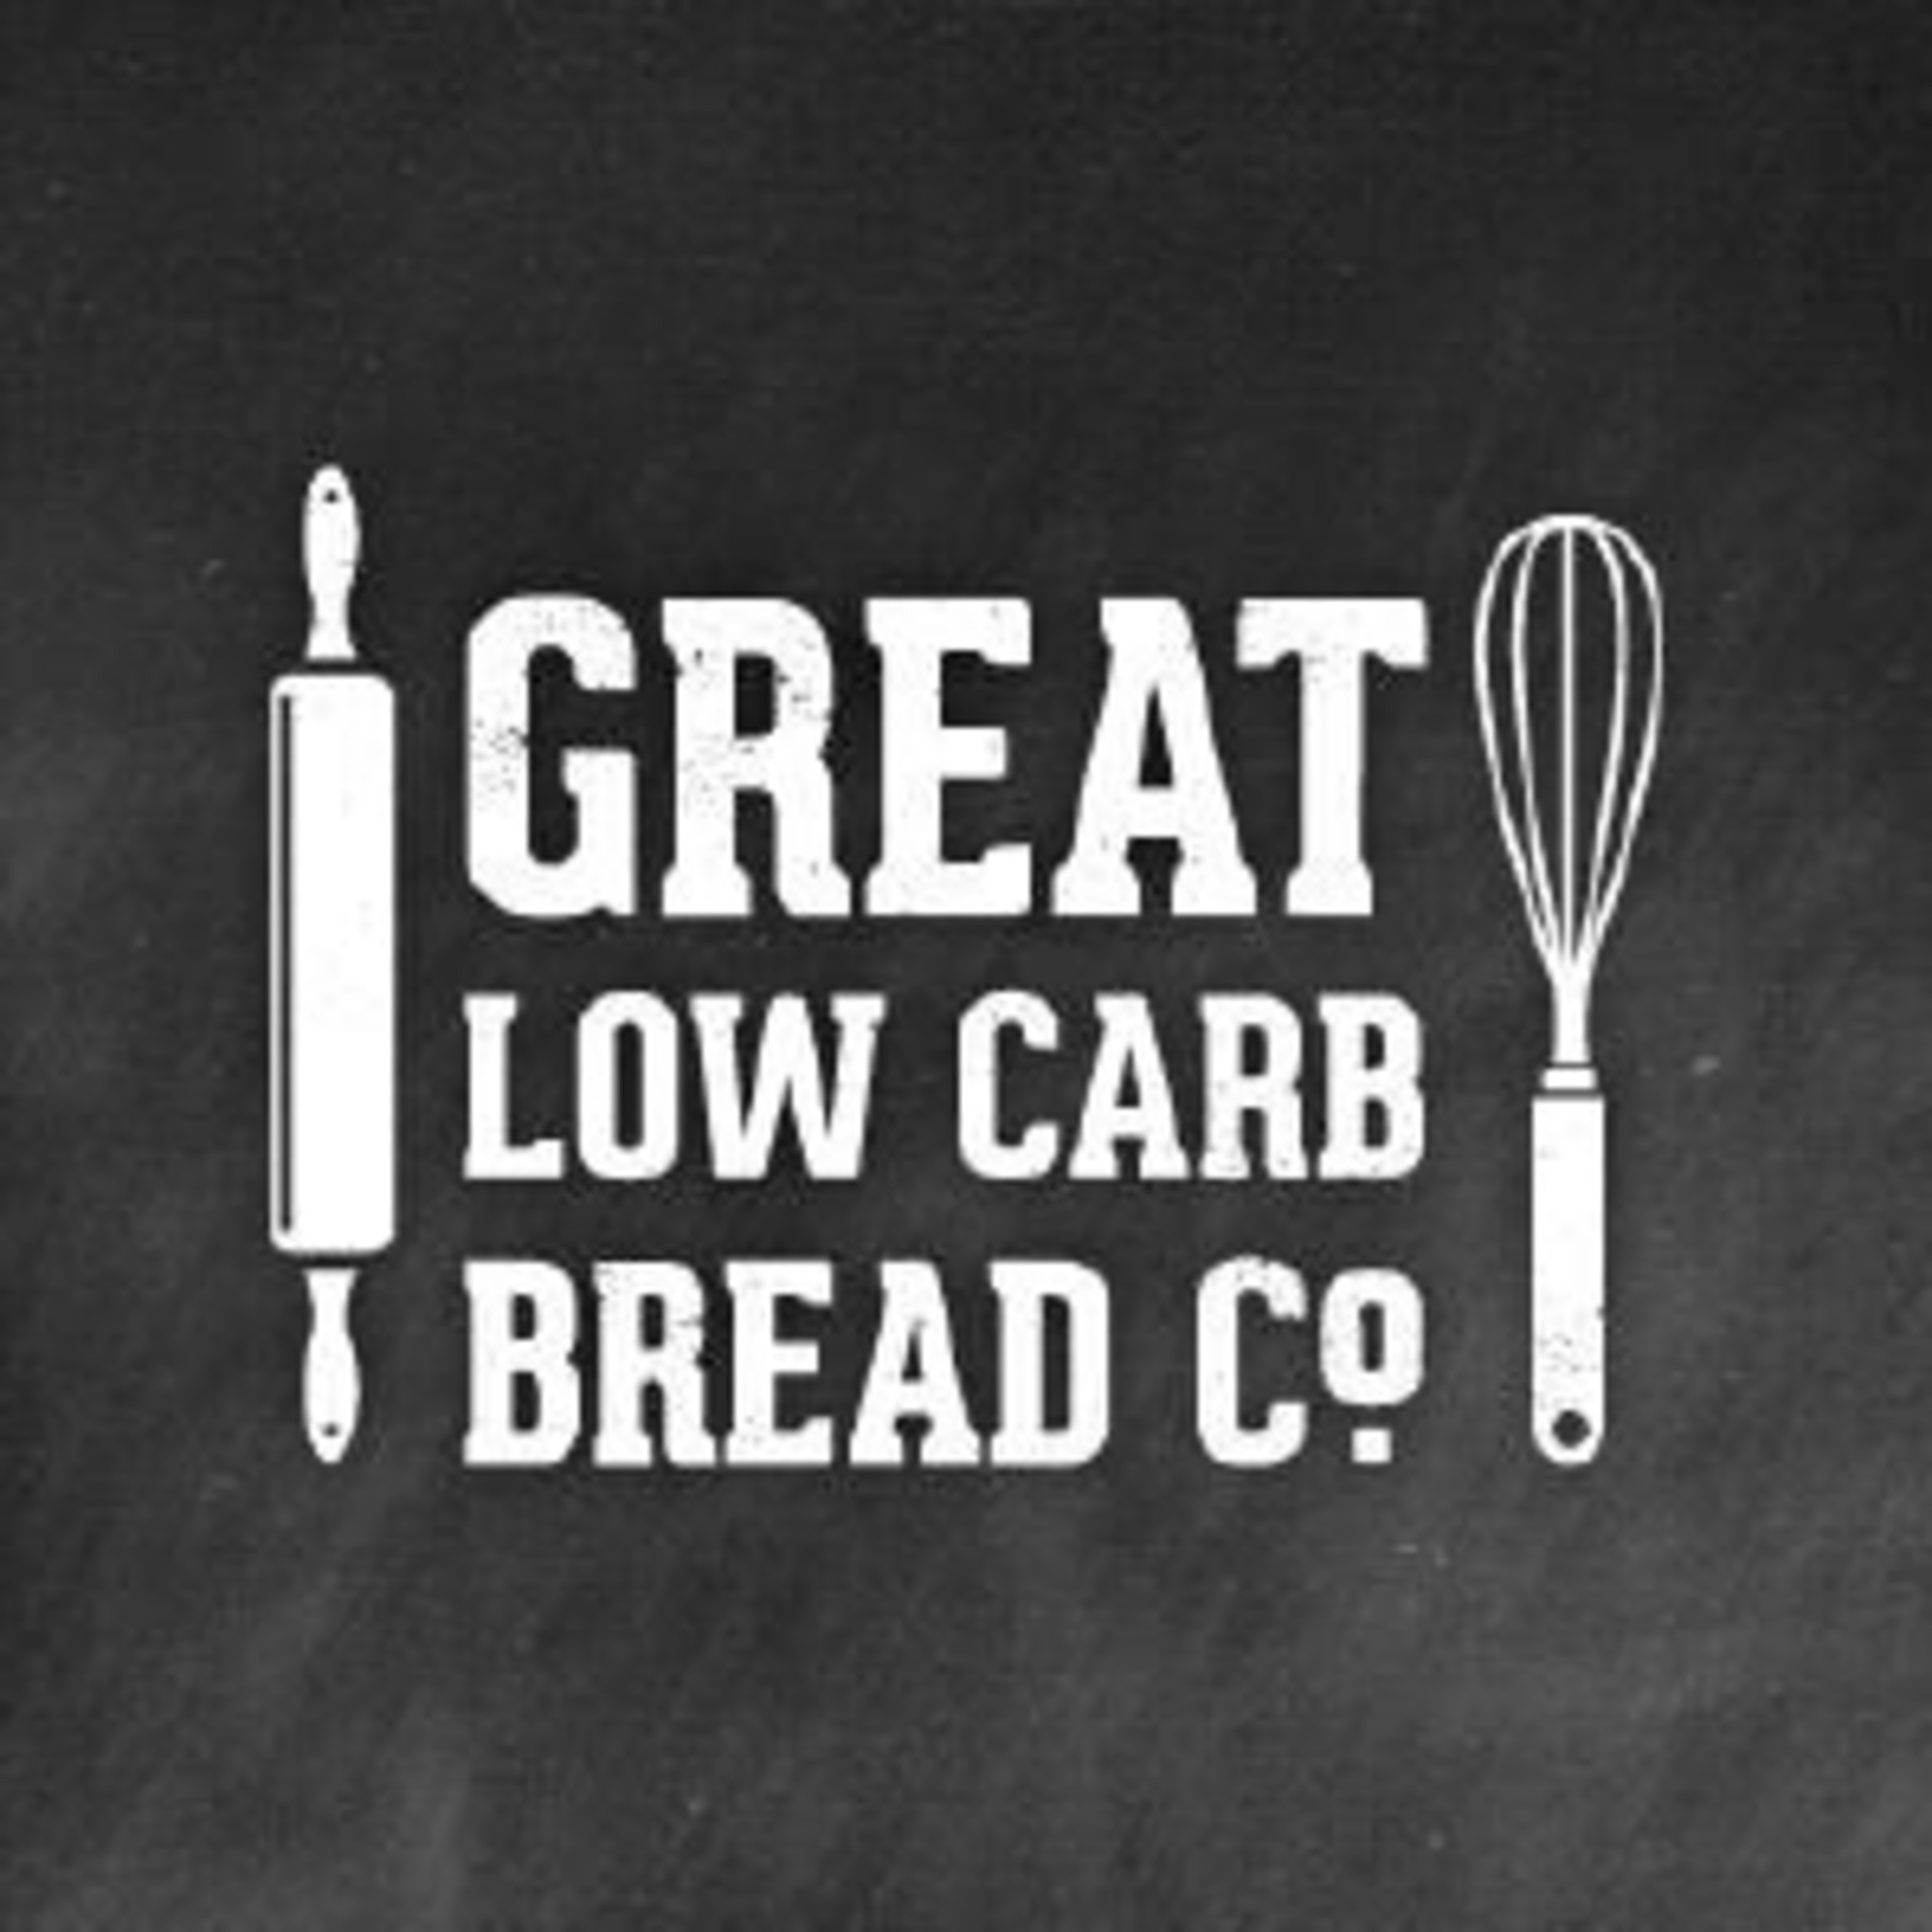 Great Low Carb Bread Company Code